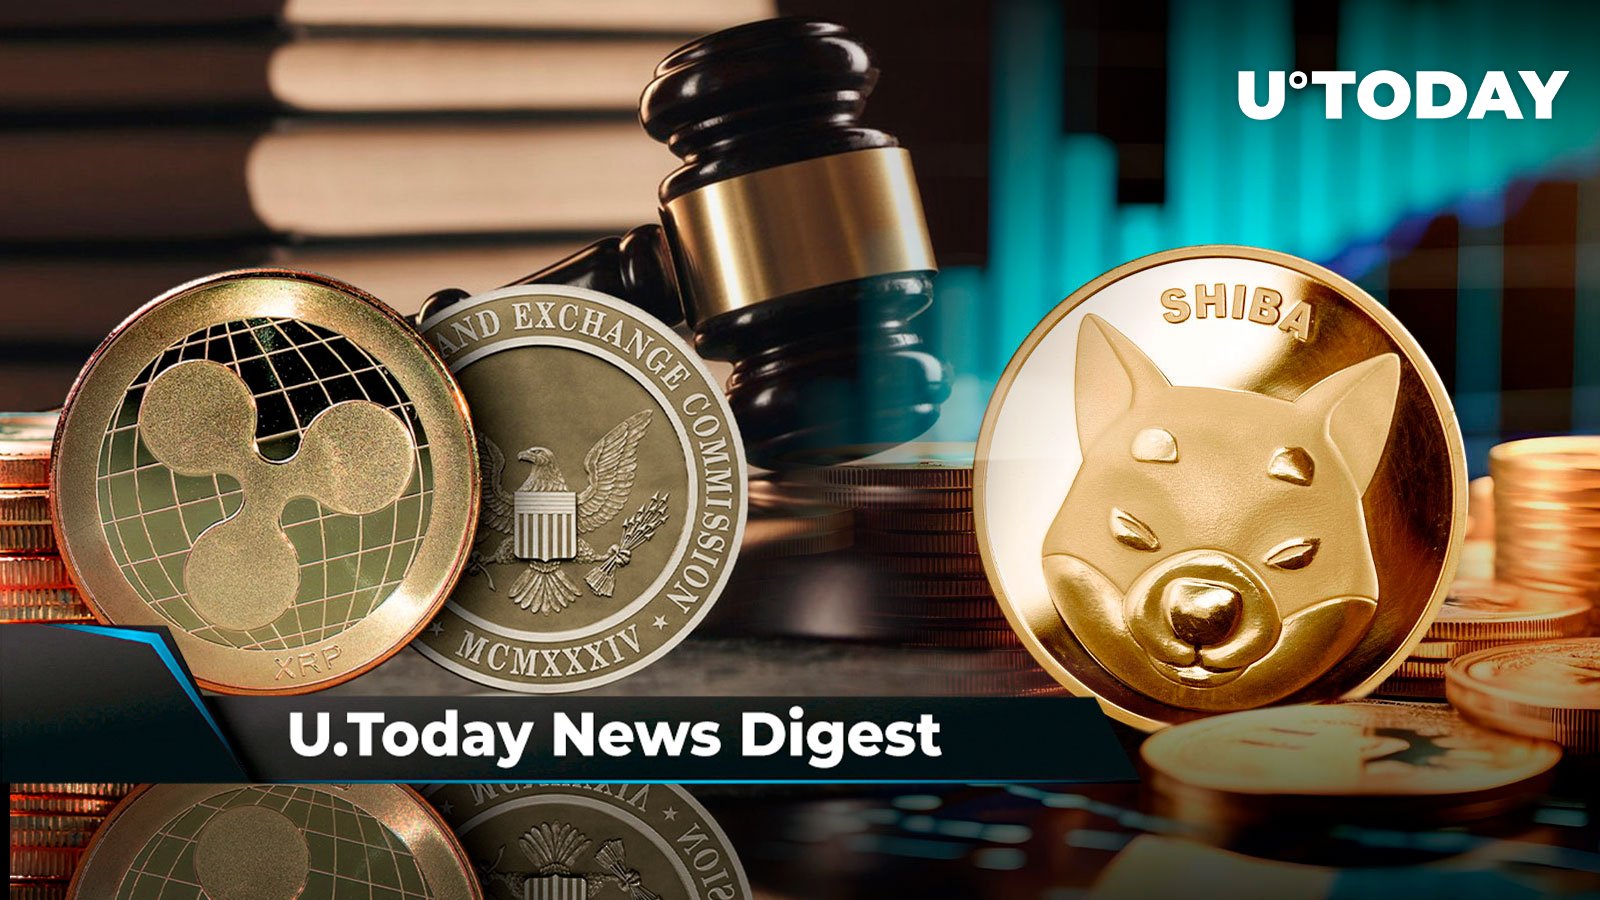 Ripple and SEC Jointly Agree to Seal Details in Remedies Briefing, Shiba Inu Team Member Expects New SHIB ATH Before BTC Halving: Crypto News Digest by U.Today